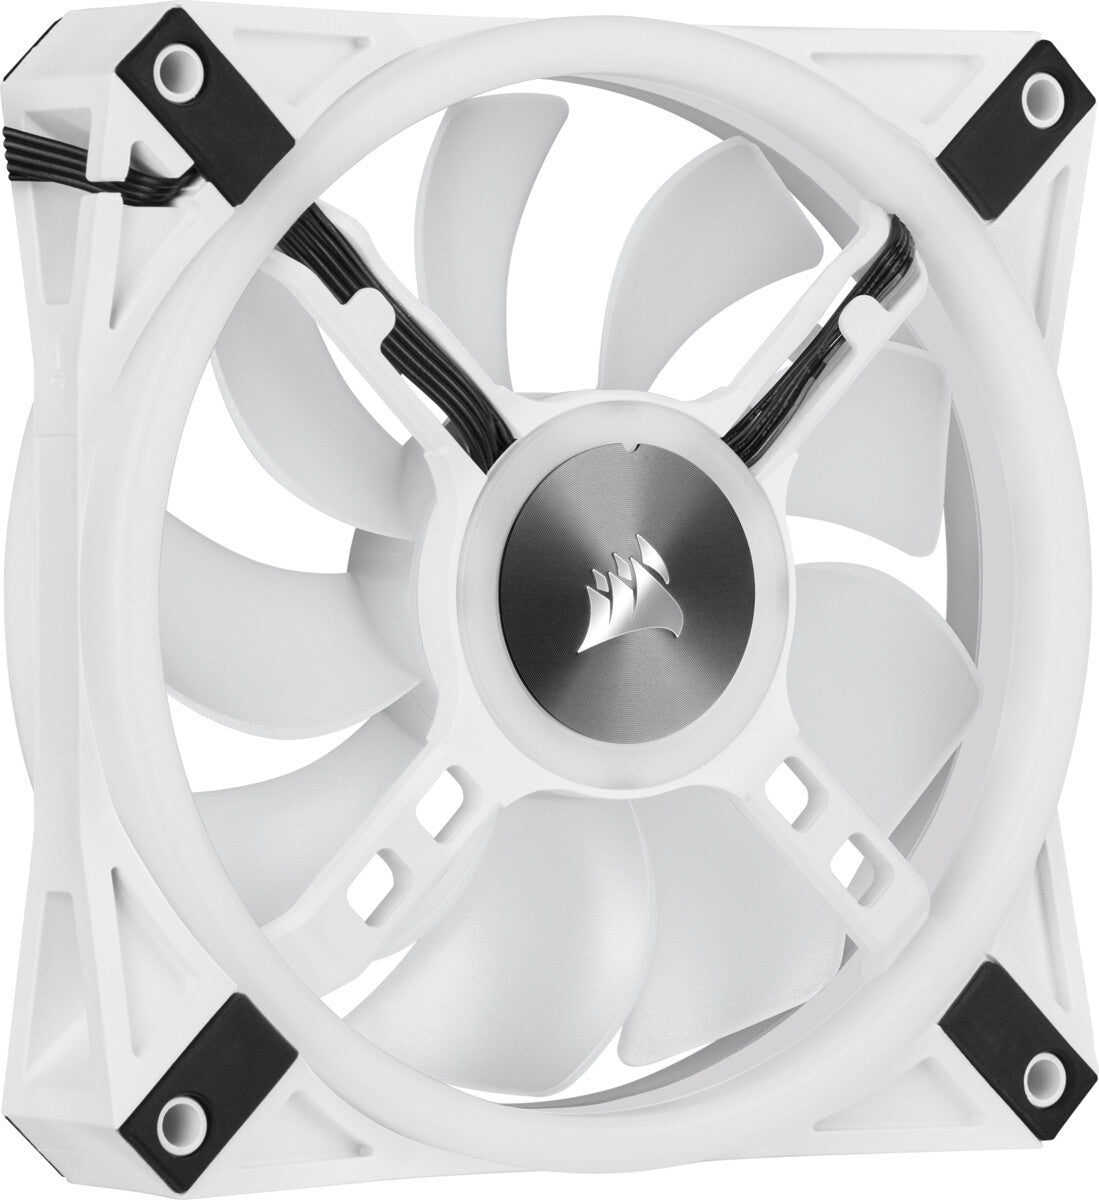 Corsair iCUE QL120 - Computer Case Fan in White - 120mm (Pack of 3)